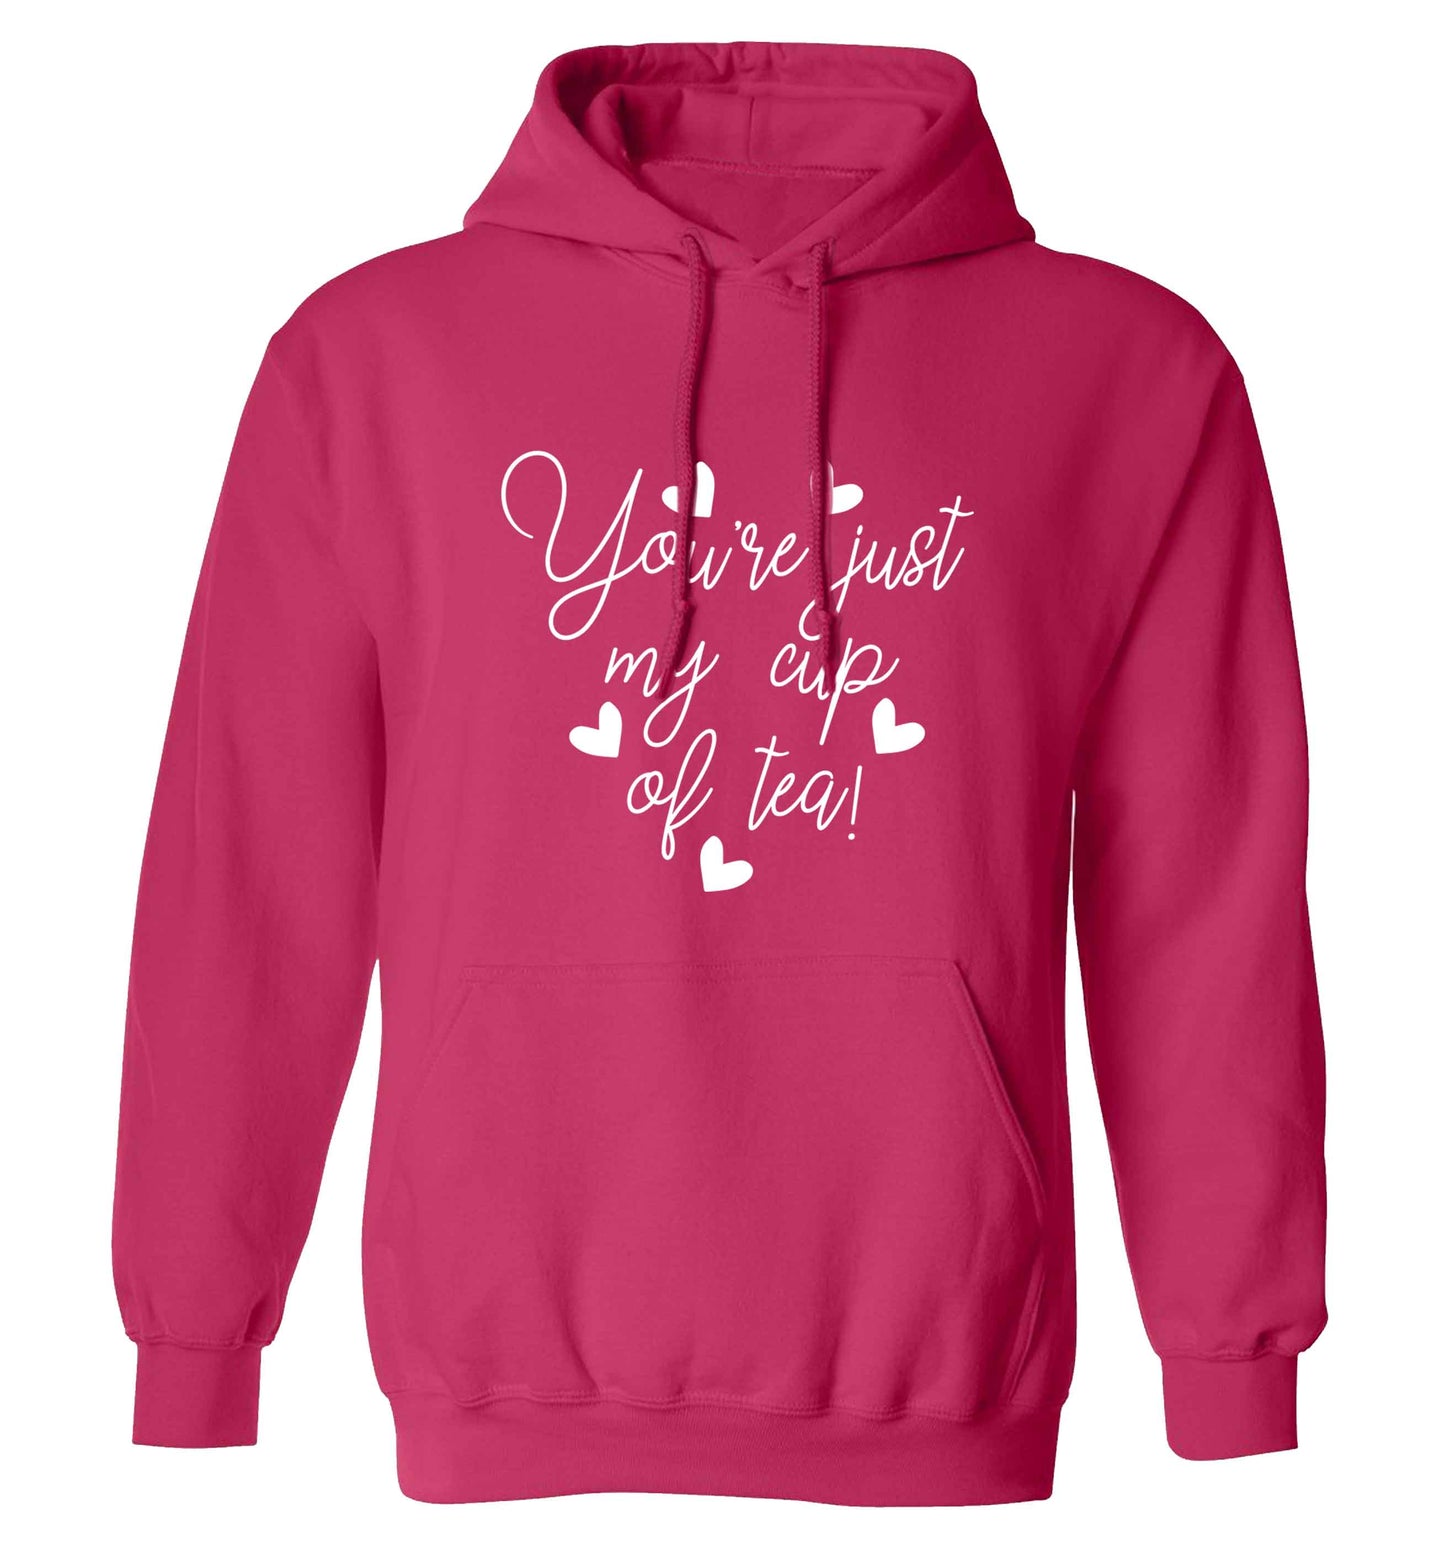 You're just my cup of tea adults unisex pink hoodie 2XL